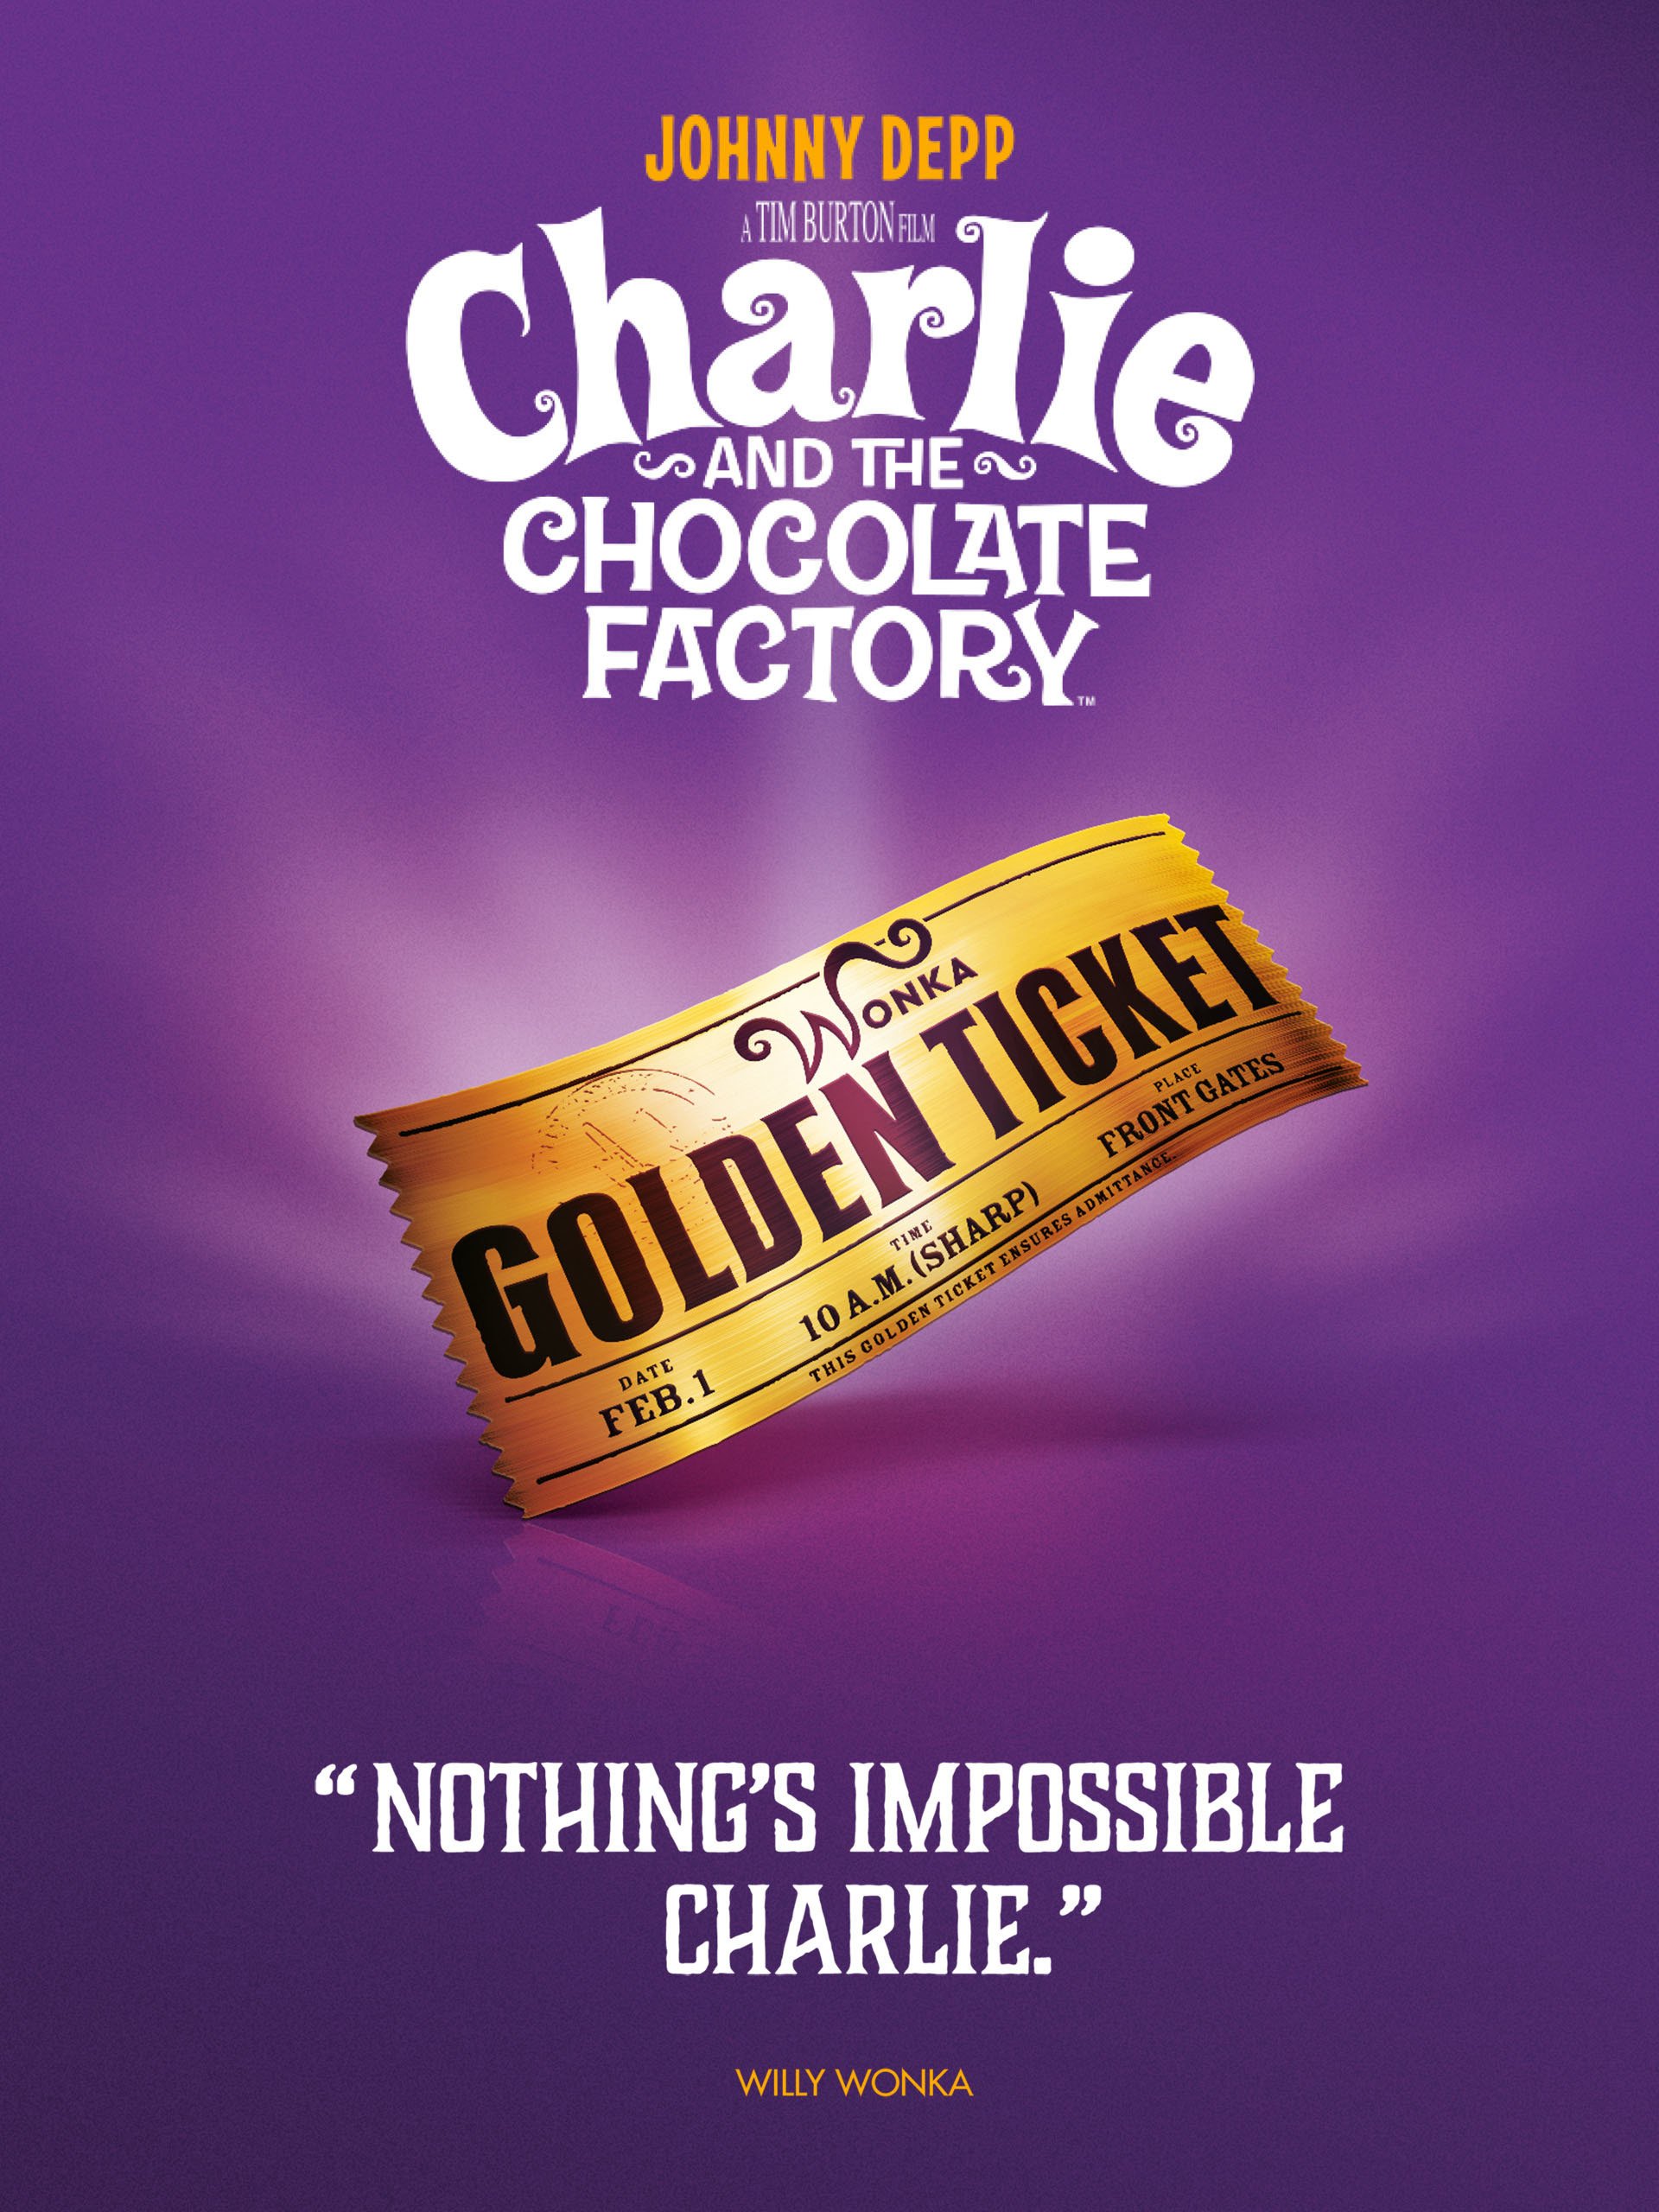 Tag Line Of Charlie And The Chocolate Factory - HD Wallpaper 